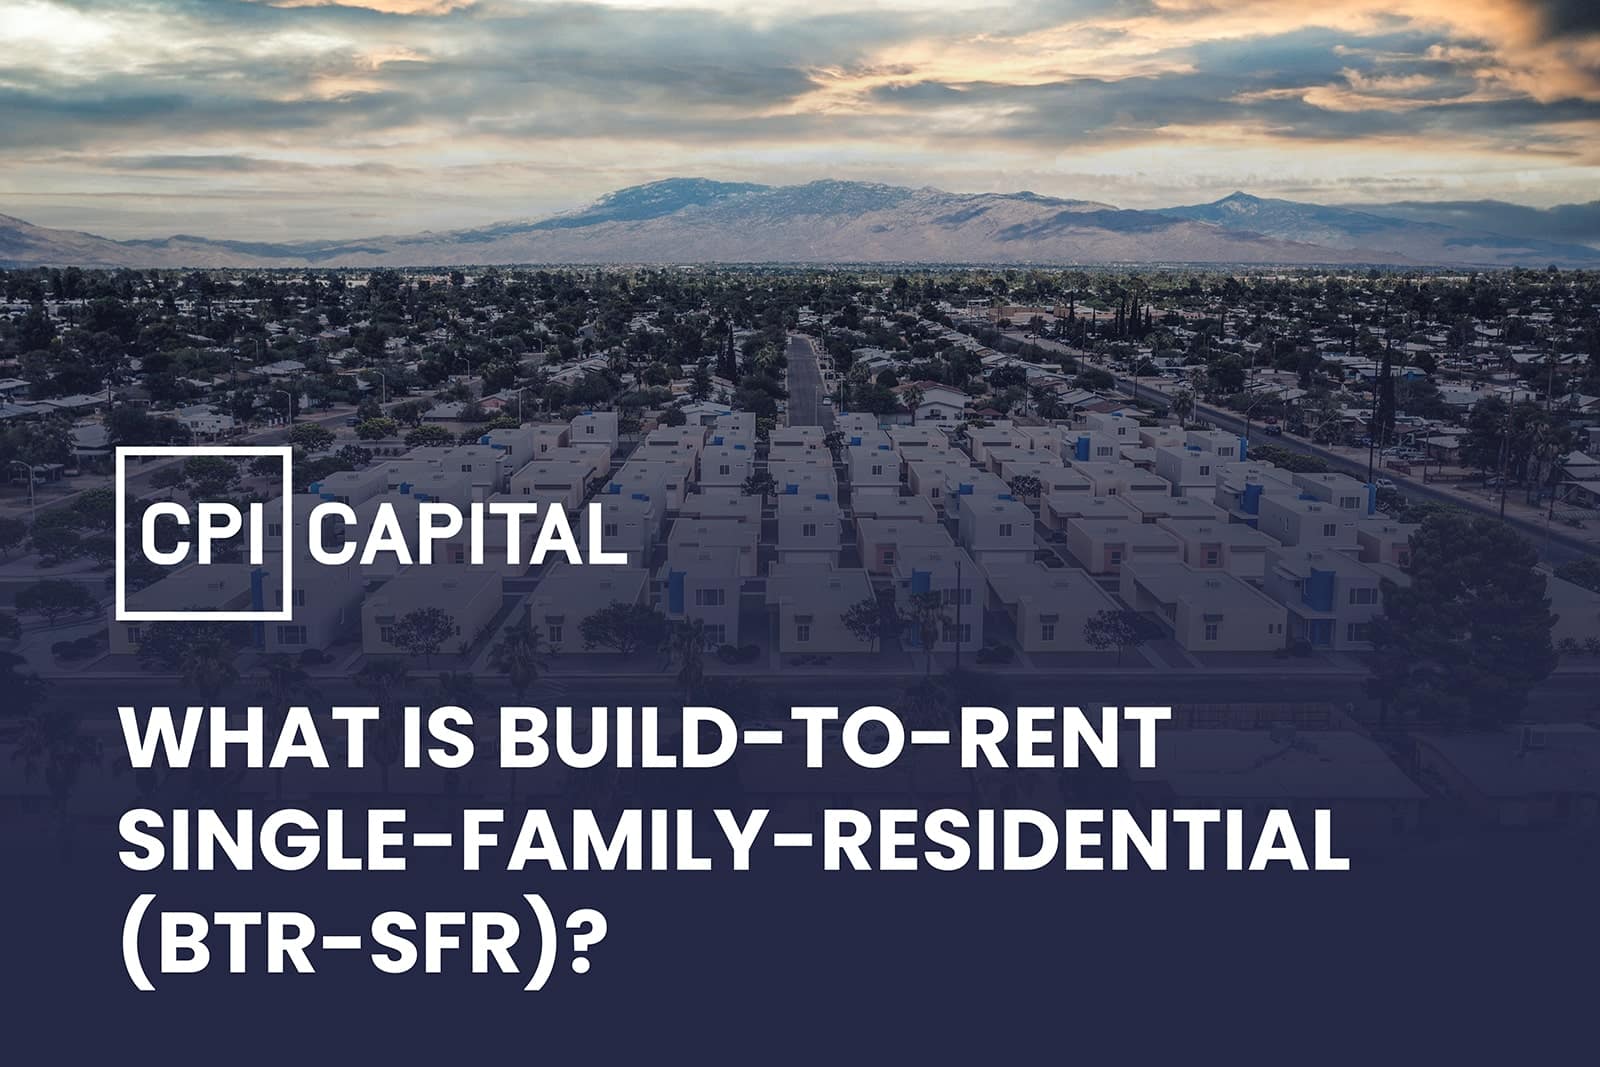 What is Build-To-Rent Single-Family-Residential?